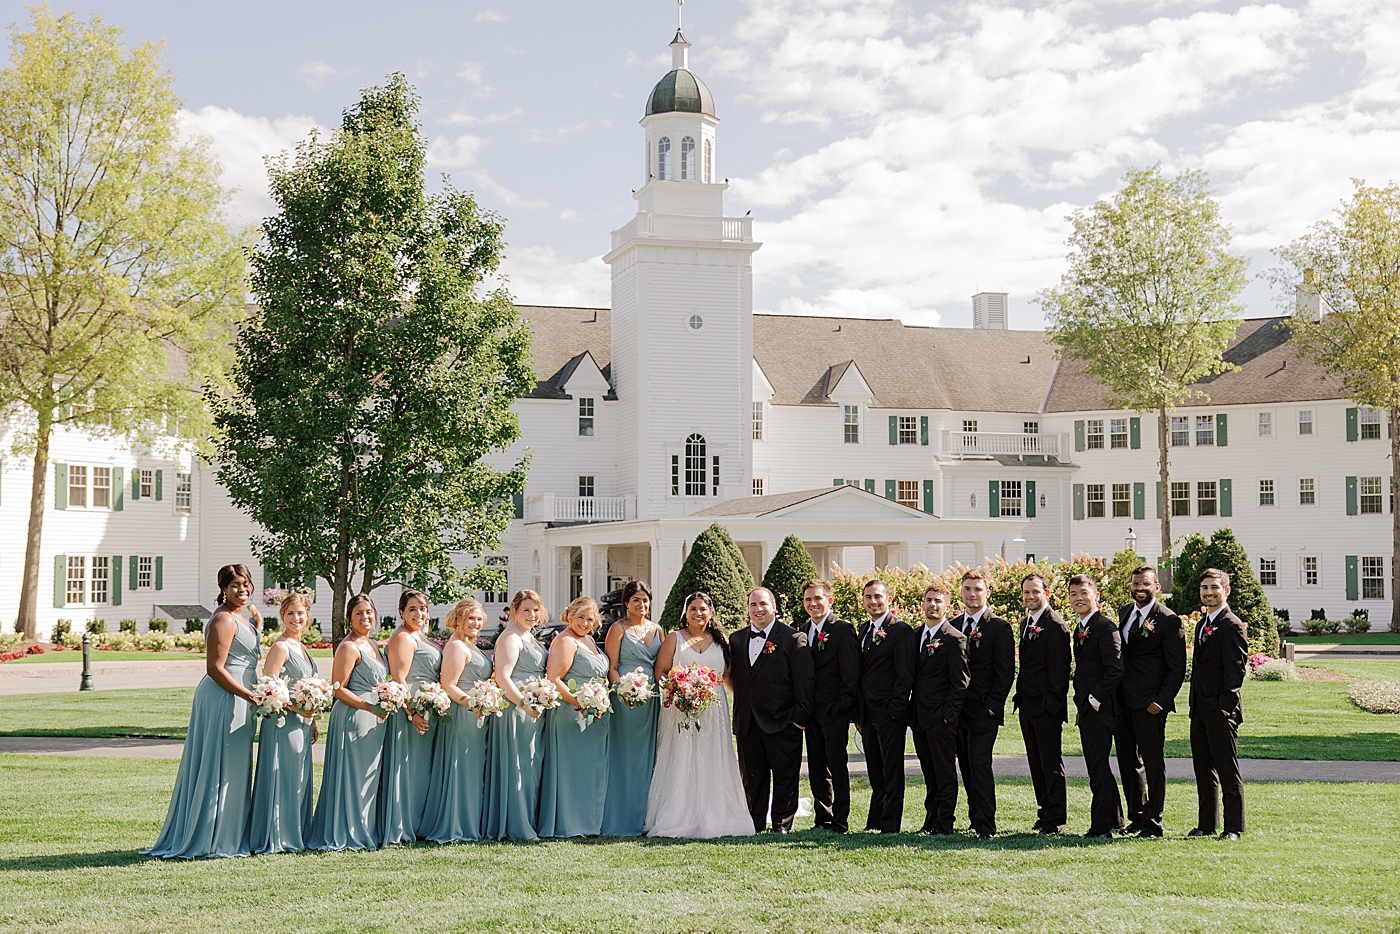 Formal image of the entire wedding party in front of the venue | Image by Hope Helmuth Photography